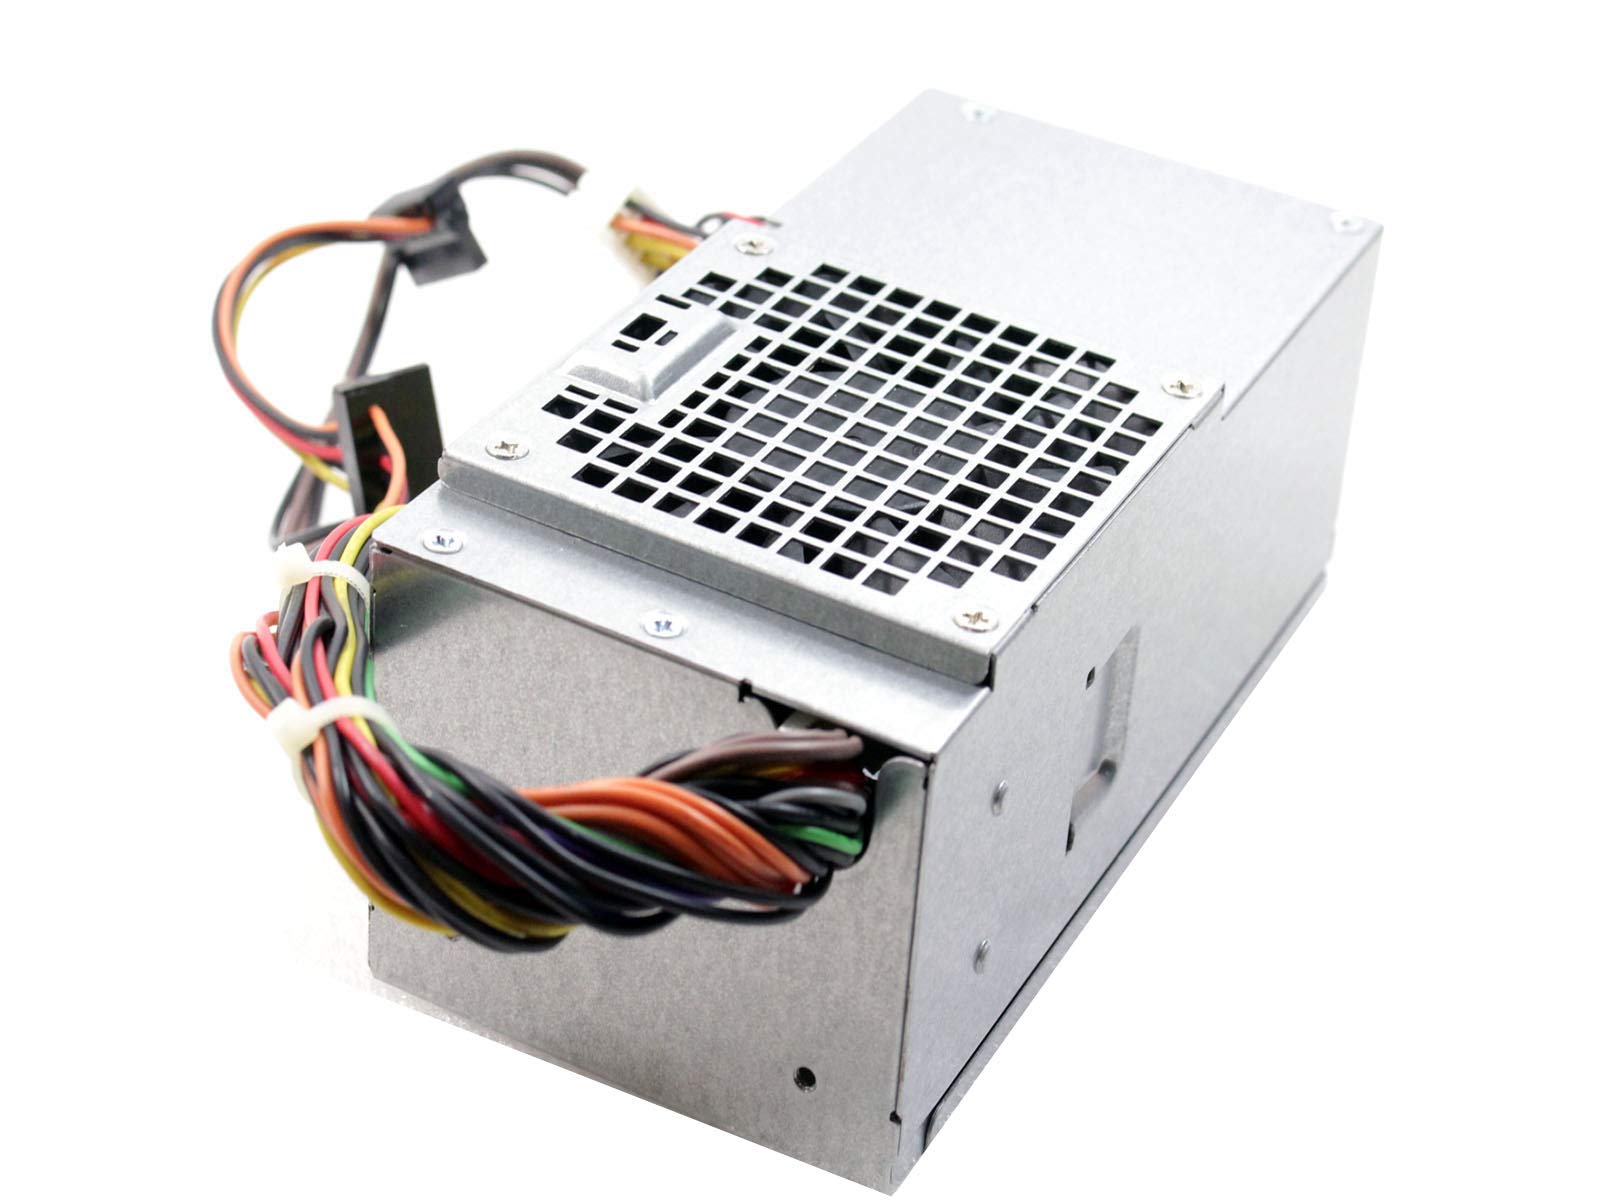 Genuine Dell 250W Watt CYY97 7GC81 L250NS-00 Power Supply Unit PSU For Inspiron 530s 620s Vostro 200s 220s, Optiplex 390, 790, 990 Desktop DT Systems Compatible Part Numbers: CYY97, 7GC81, 6MVJH, YJ1JT, 3MV8H Compatible Model Numbers: L250NS-00, D250